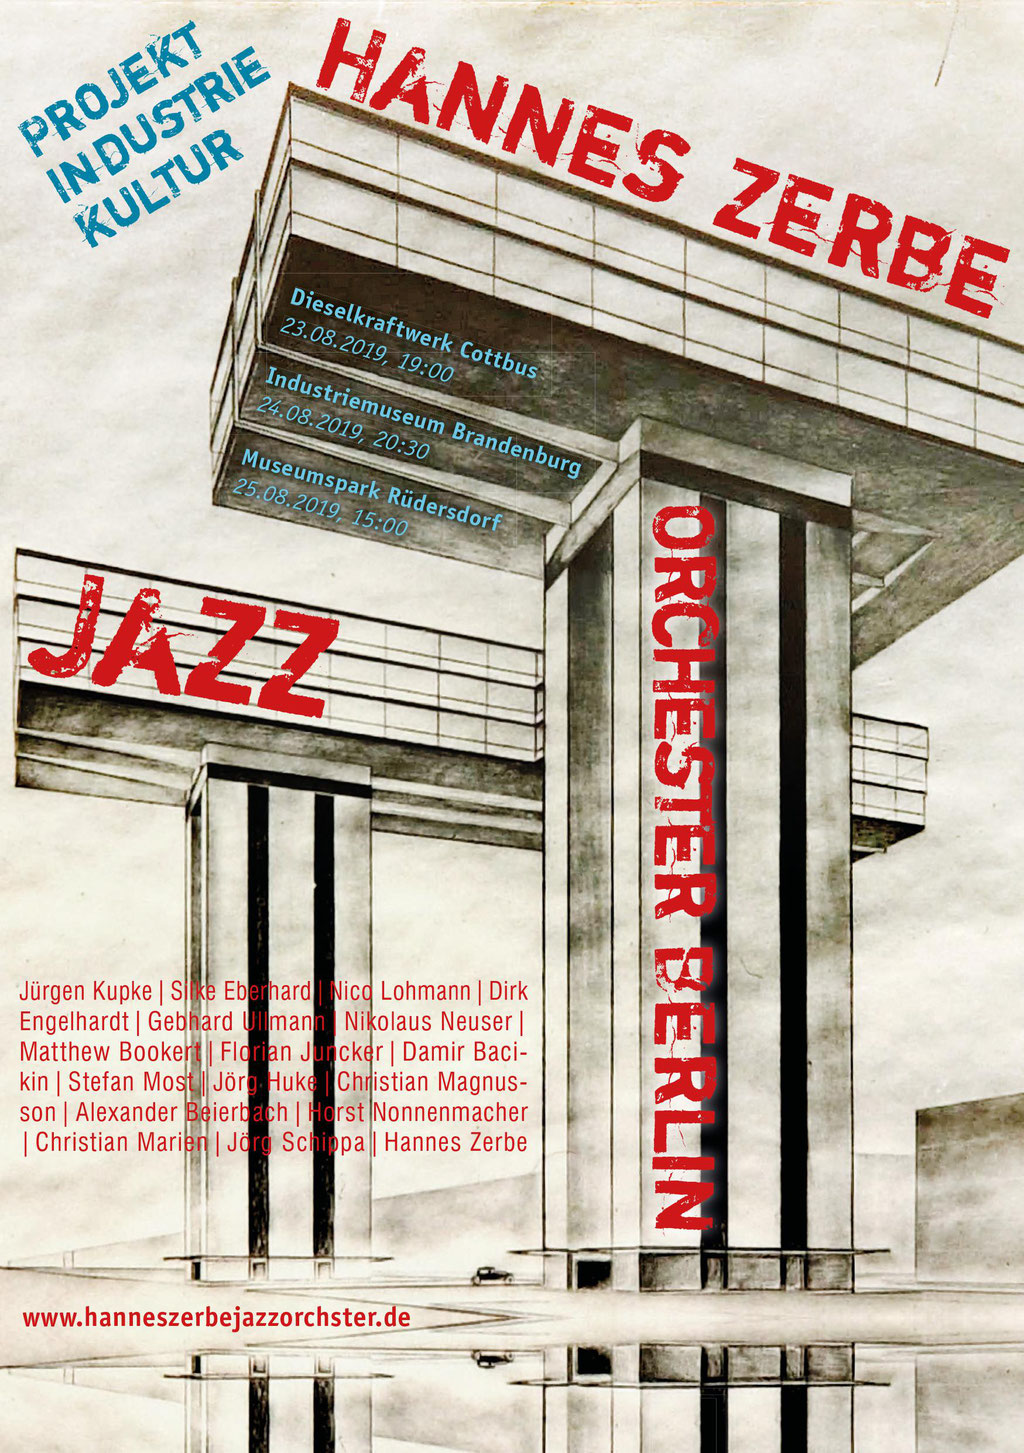 The Hannes Zerbe Jazz Orchestra Berlin is an unconventional bigband which exists since 2011. Musicians well-known in Berlin’s and the international jazz scene play under the direction of Hannes Zerbe who is regarded a founding father among jazz musicians in the German Democratic Republic.